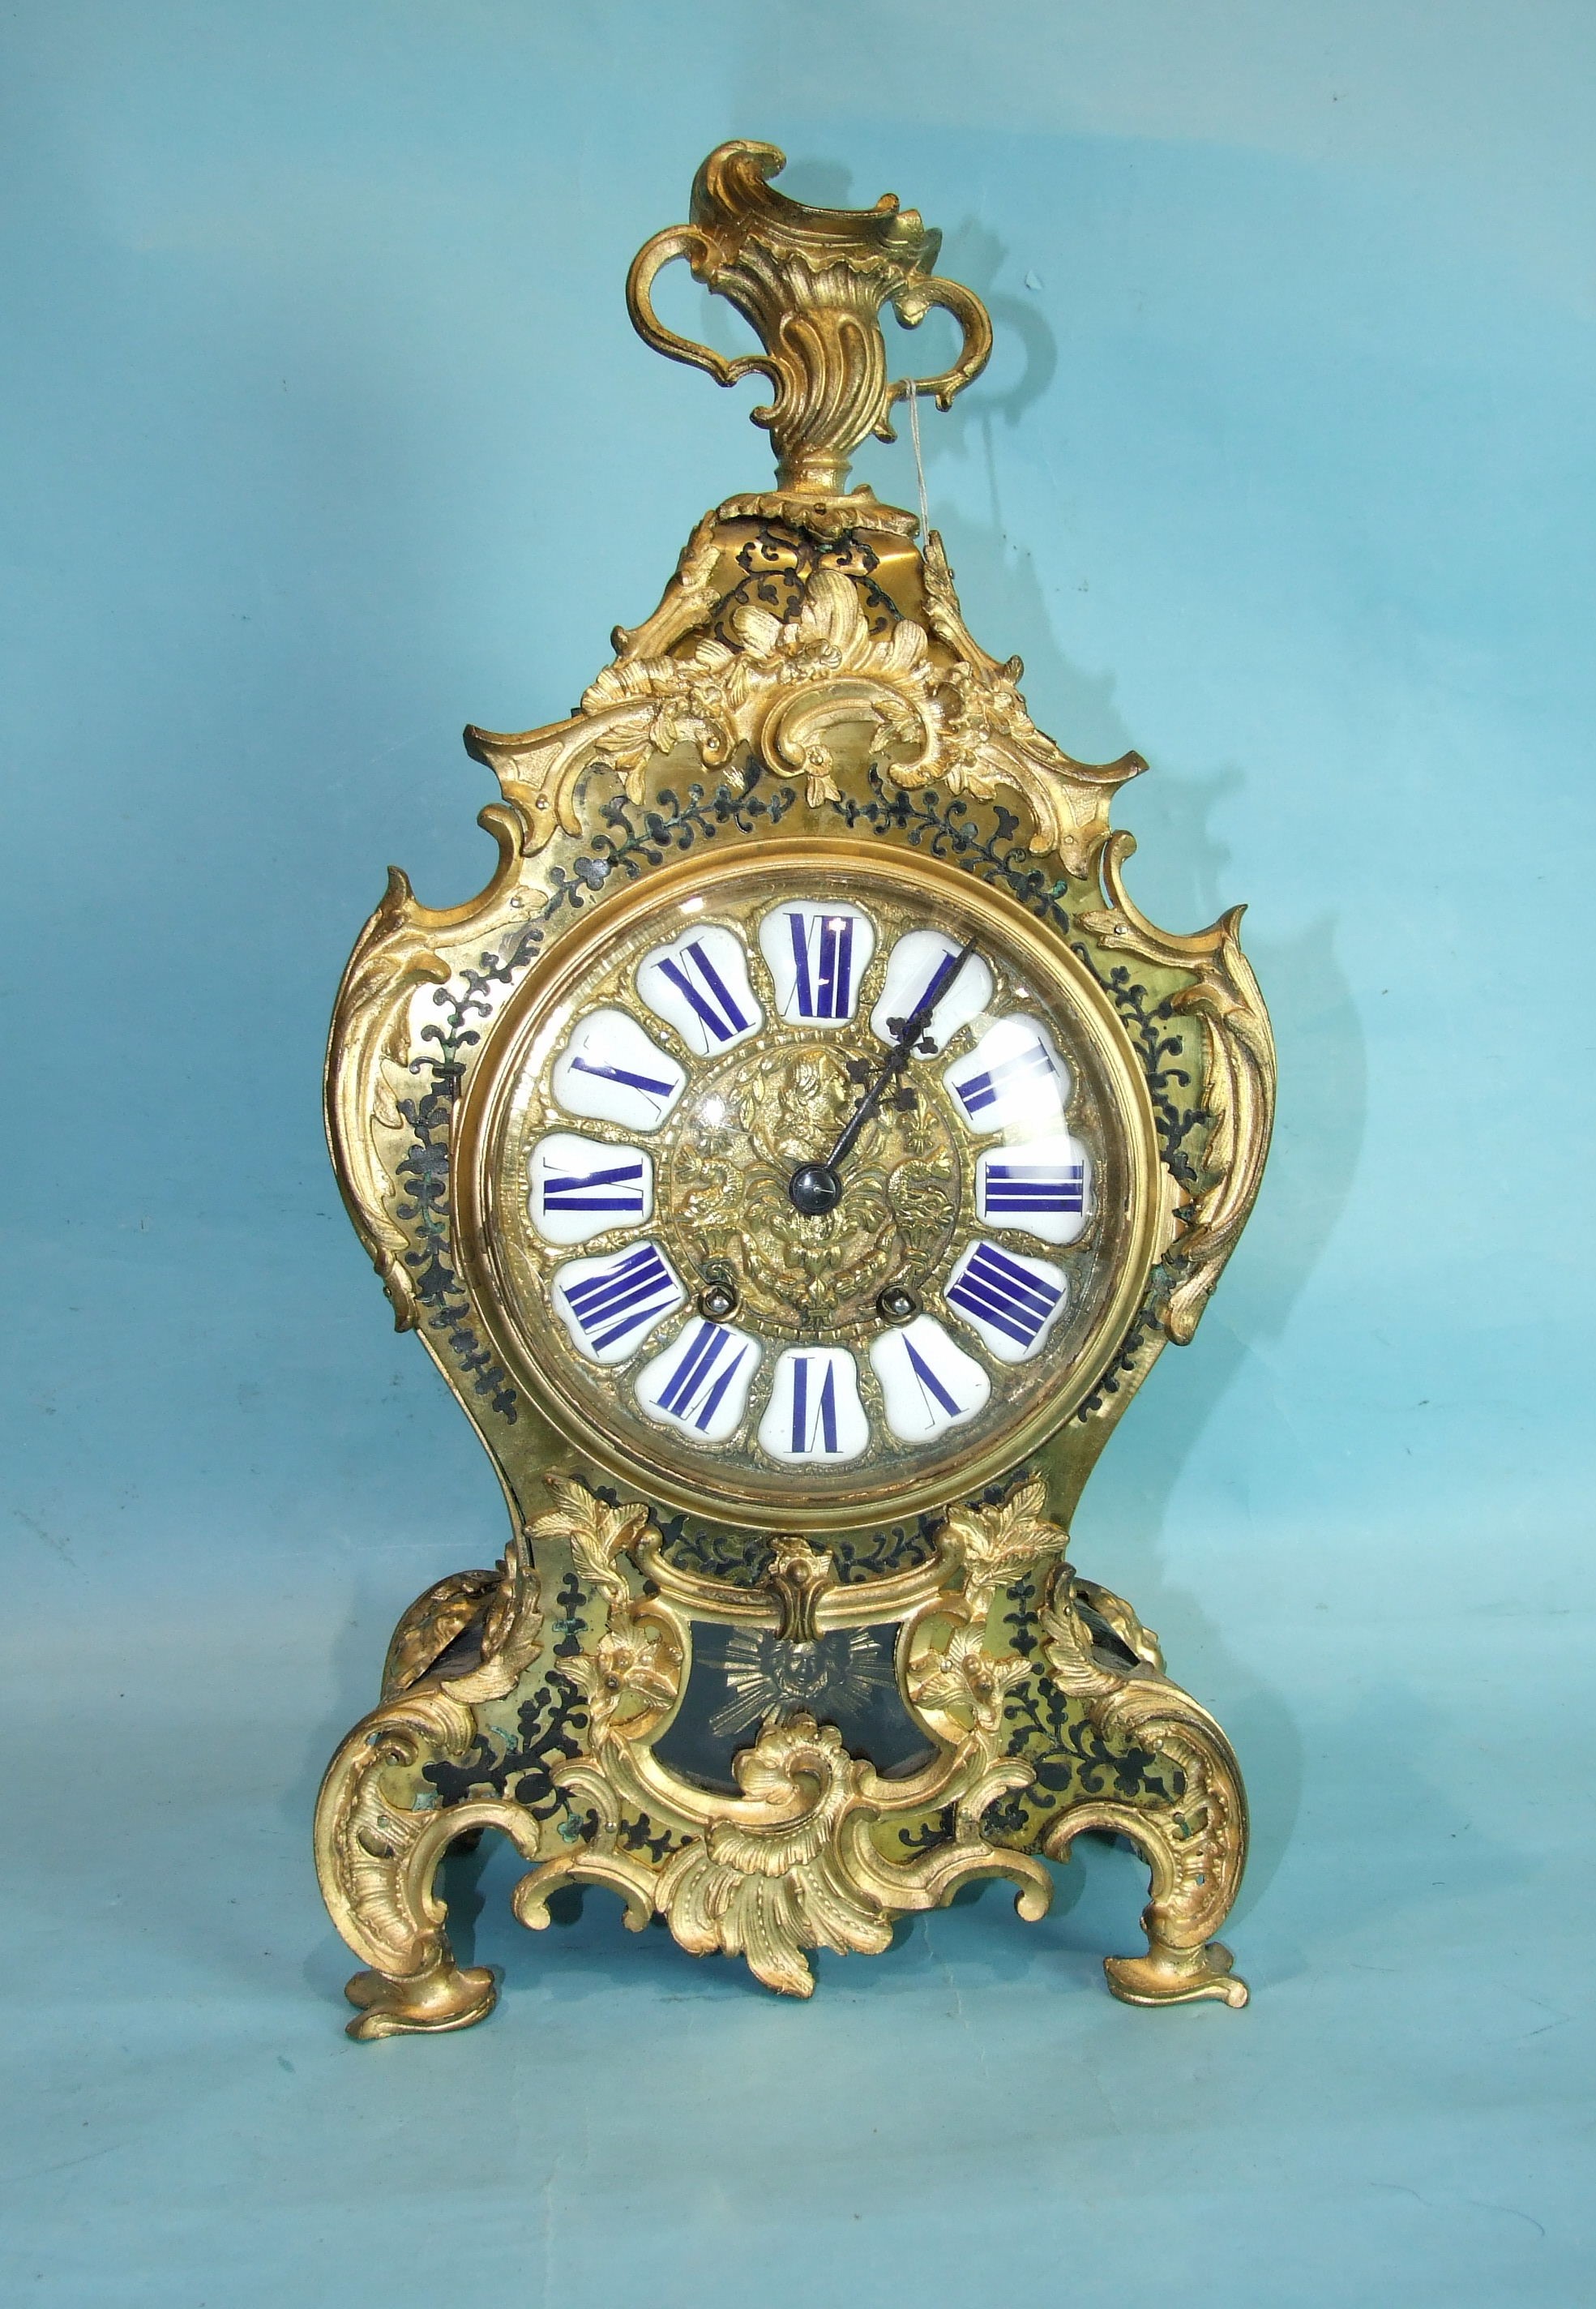 A 19th century French Boulle mantel clock of balloon shape, with gilt metal mounts and twin-train